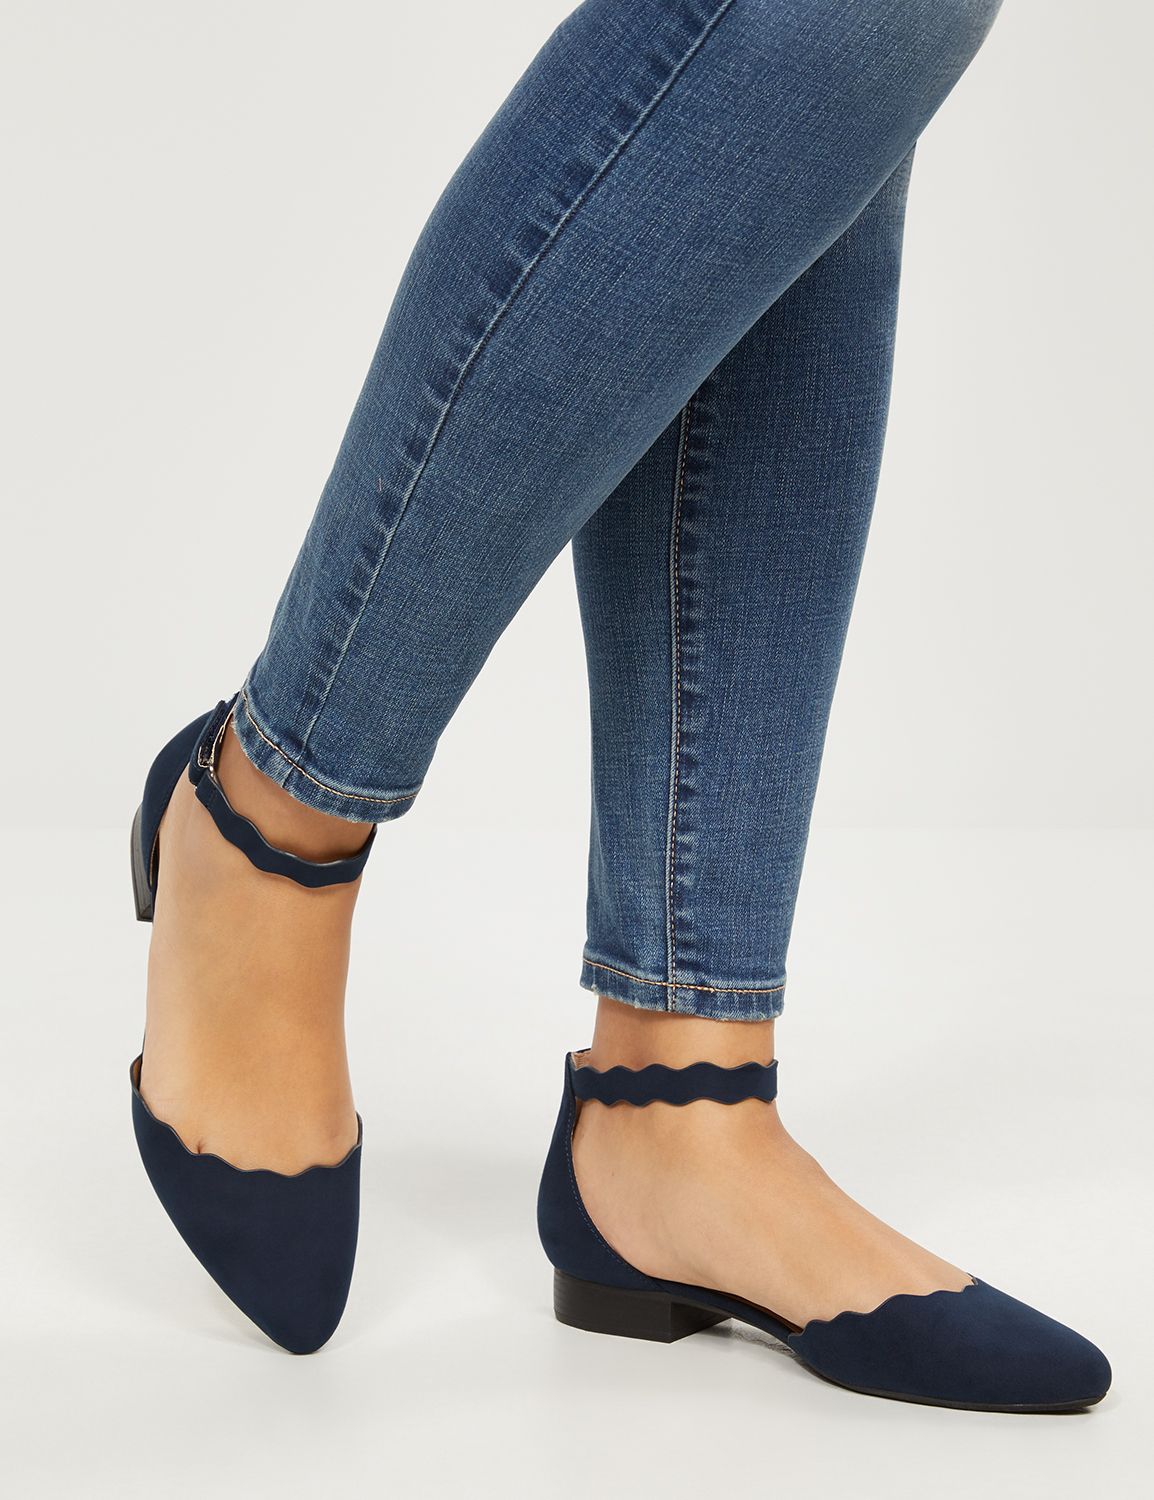 lane bryant wide width shoes